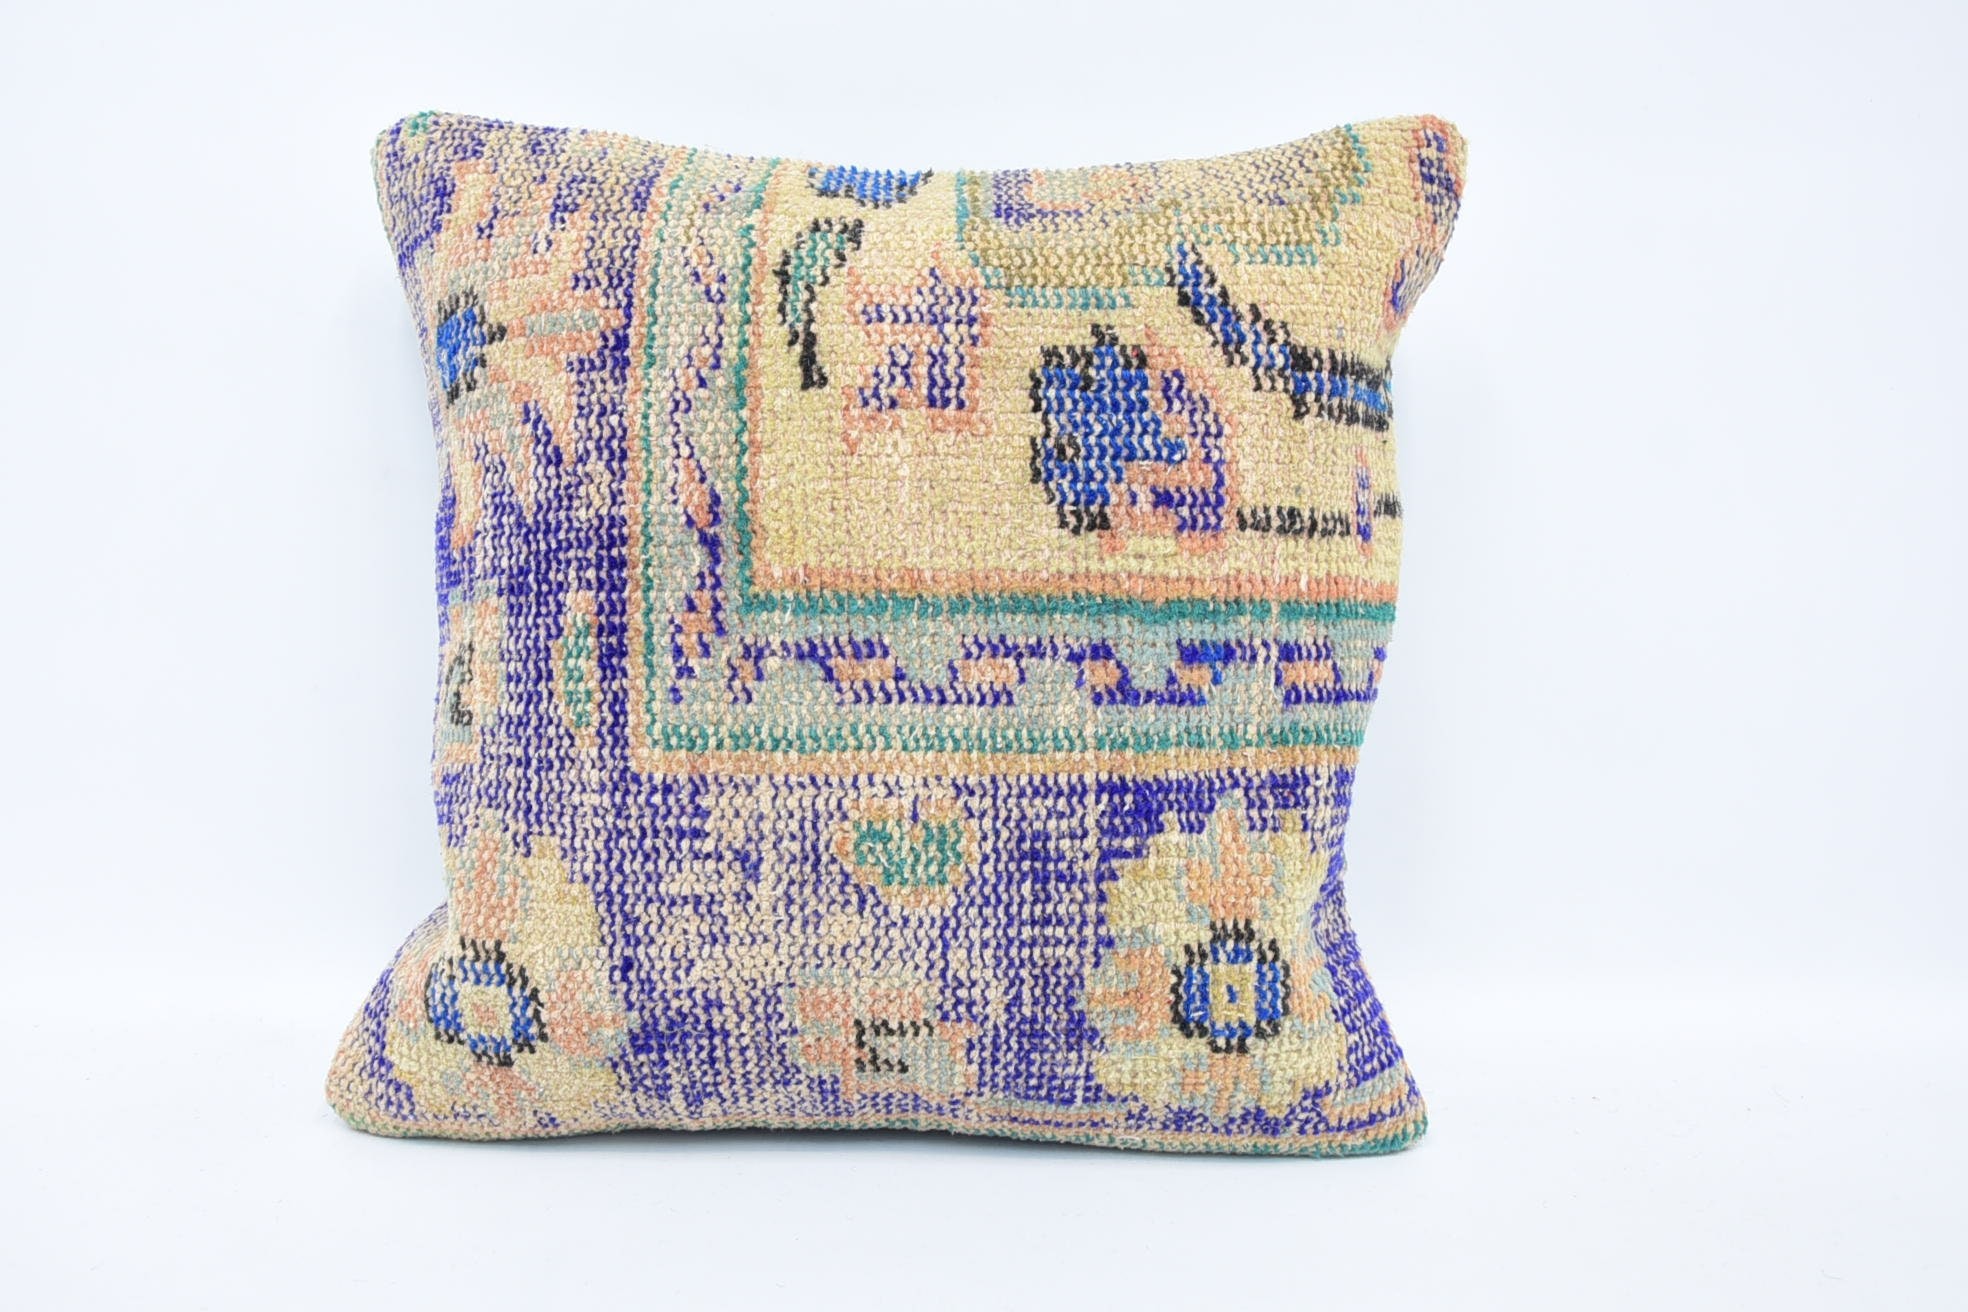 Pillow for Sofa, Muted Cushion, Aesthetic Pillow Case, 18"x18" Blue Cushion Cover, Vintage Kilim Pillow, Turkish Kilim Pillow